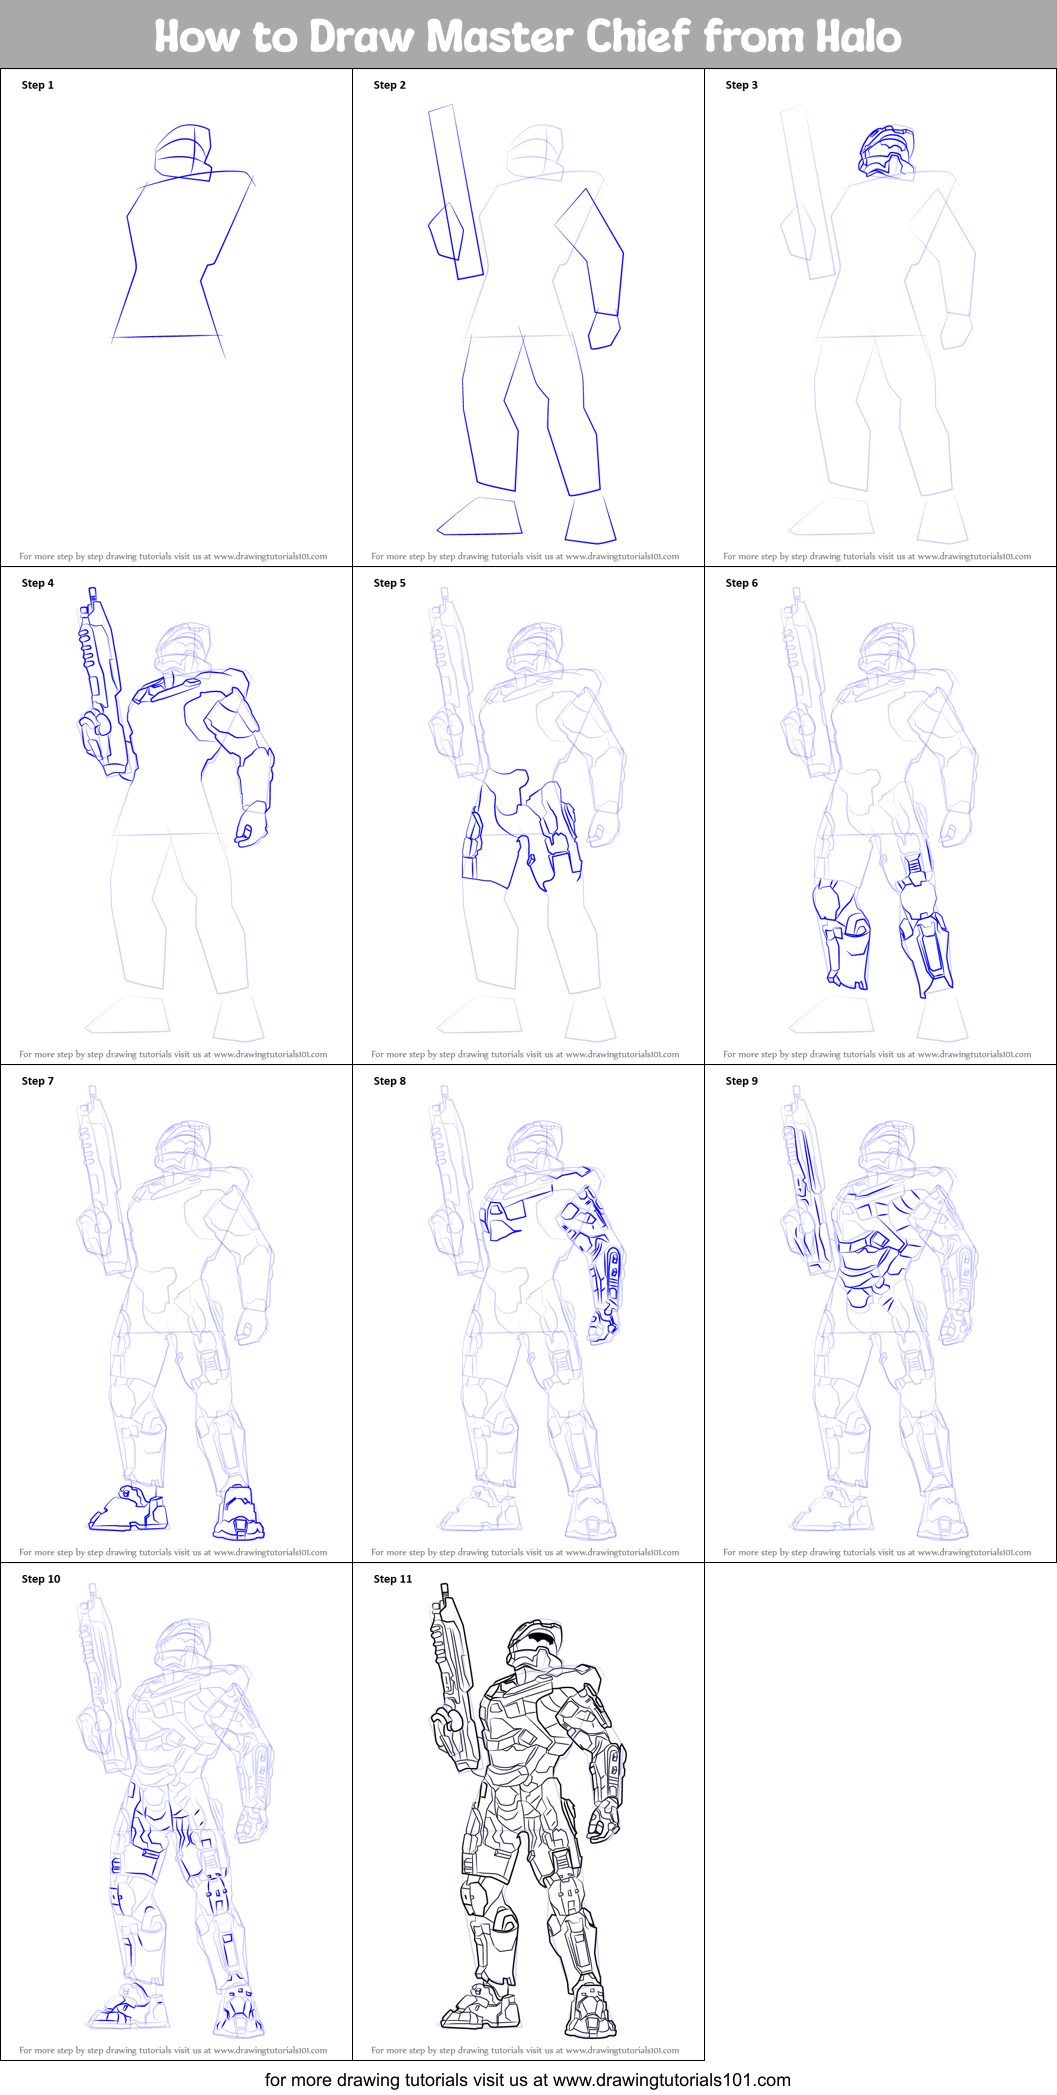 How to Draw Master Chief from Halo printable step by step drawing sheet